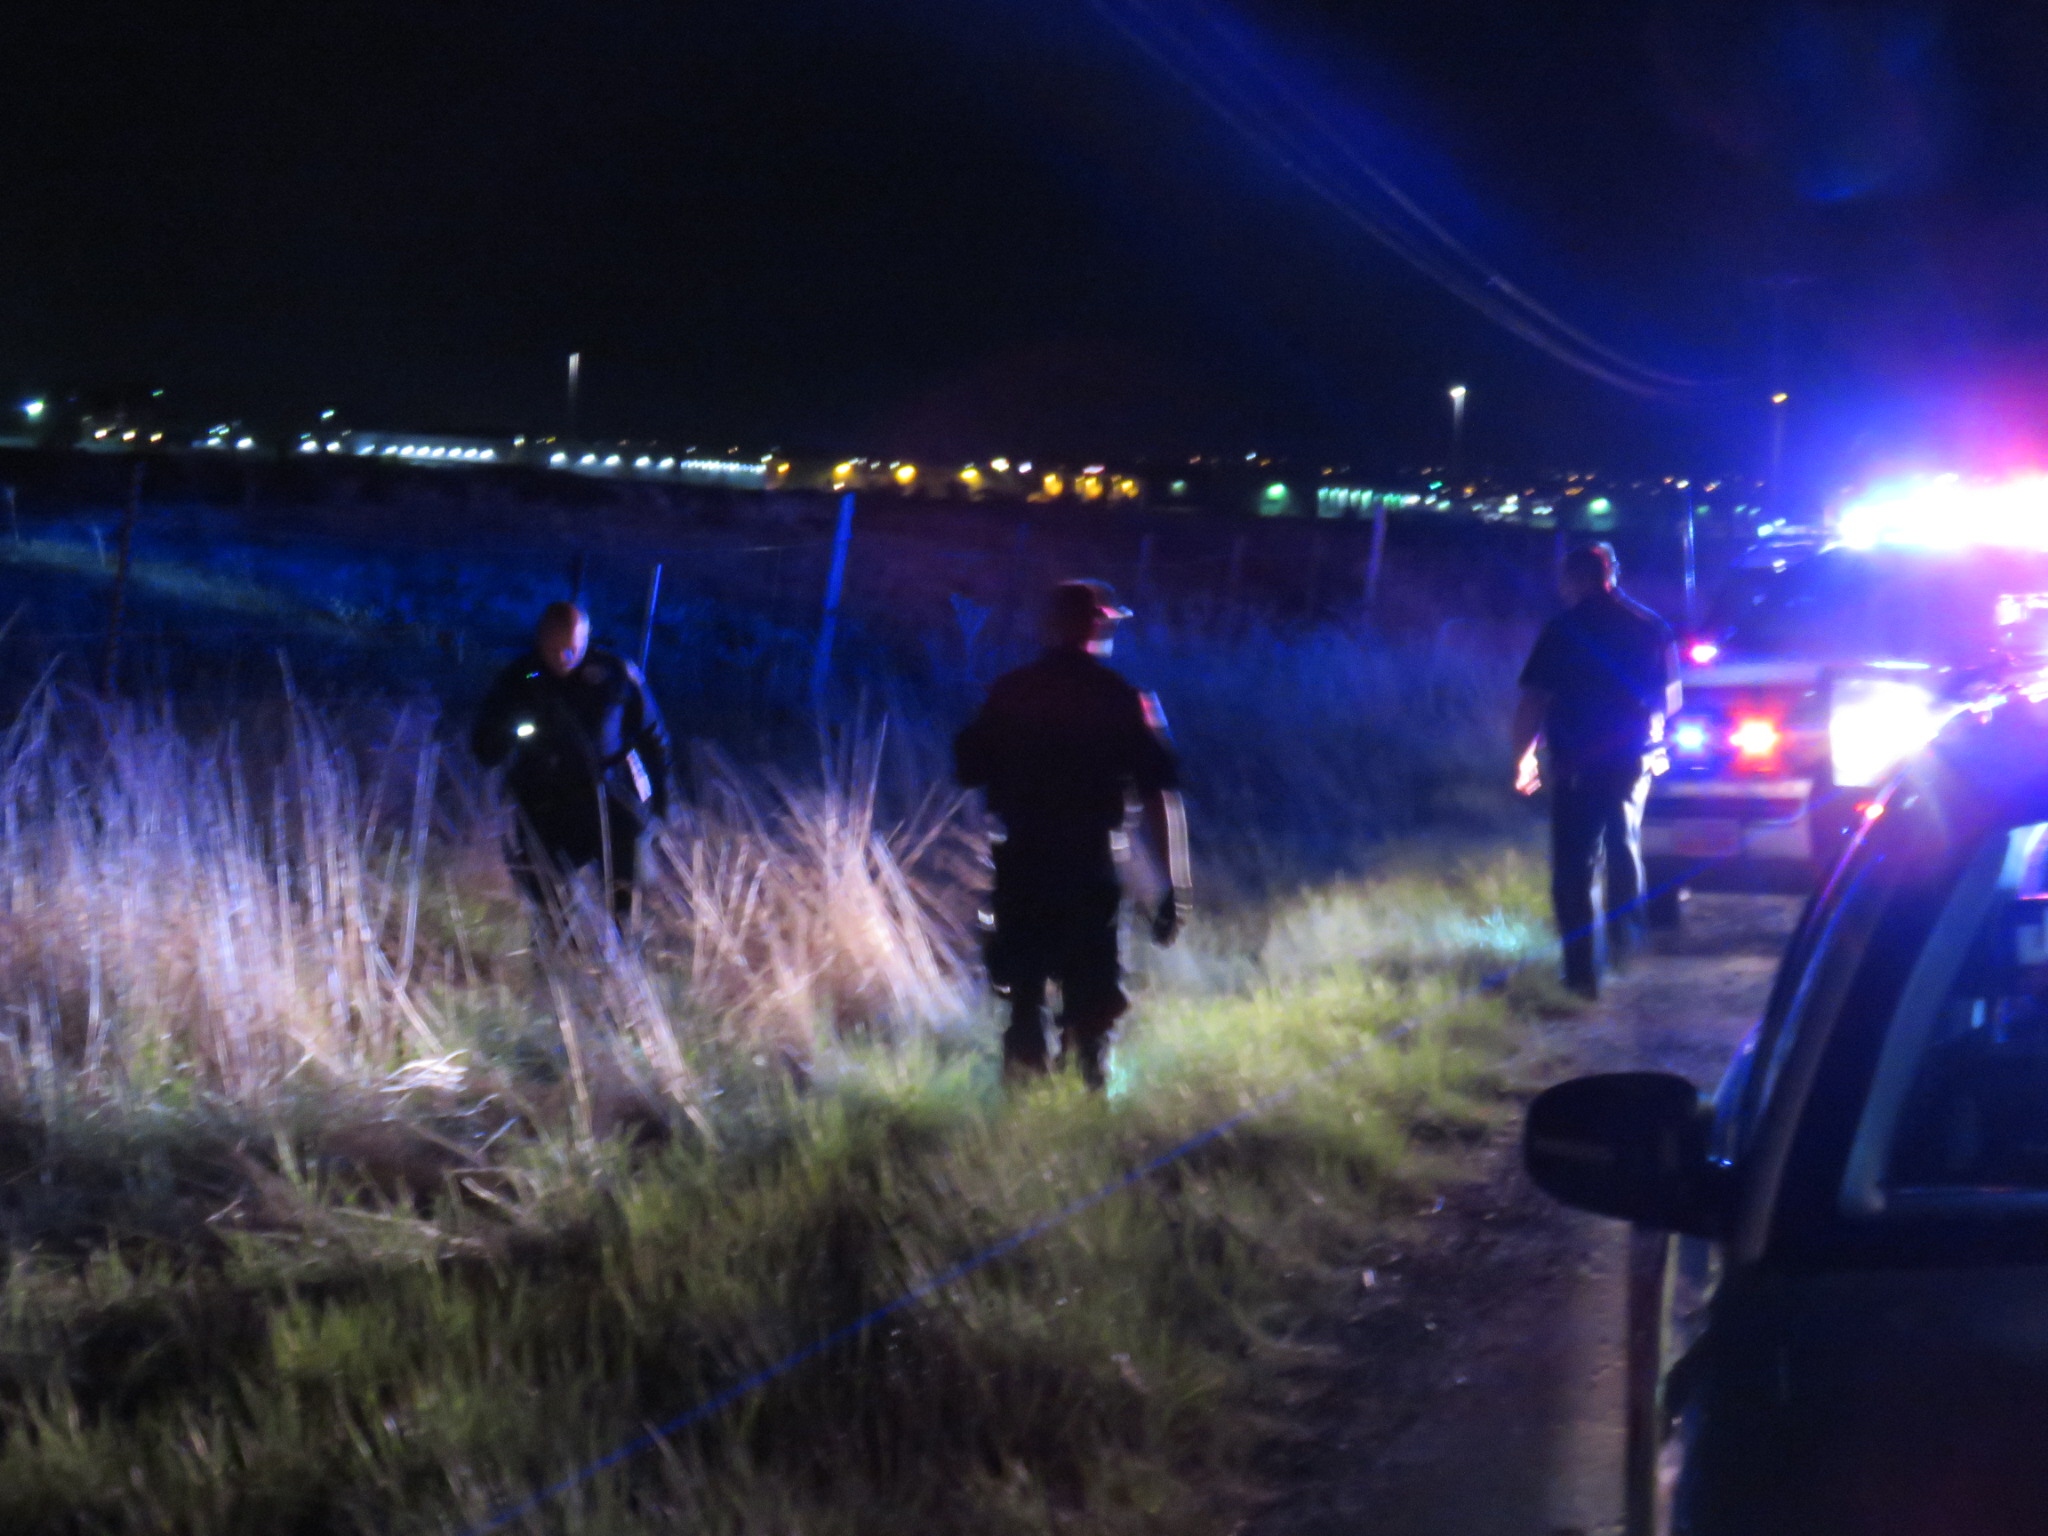 A parole fugitive was taken into custody Monday night after a high speed chase in West Valley City. Photo: Gephardt Daily